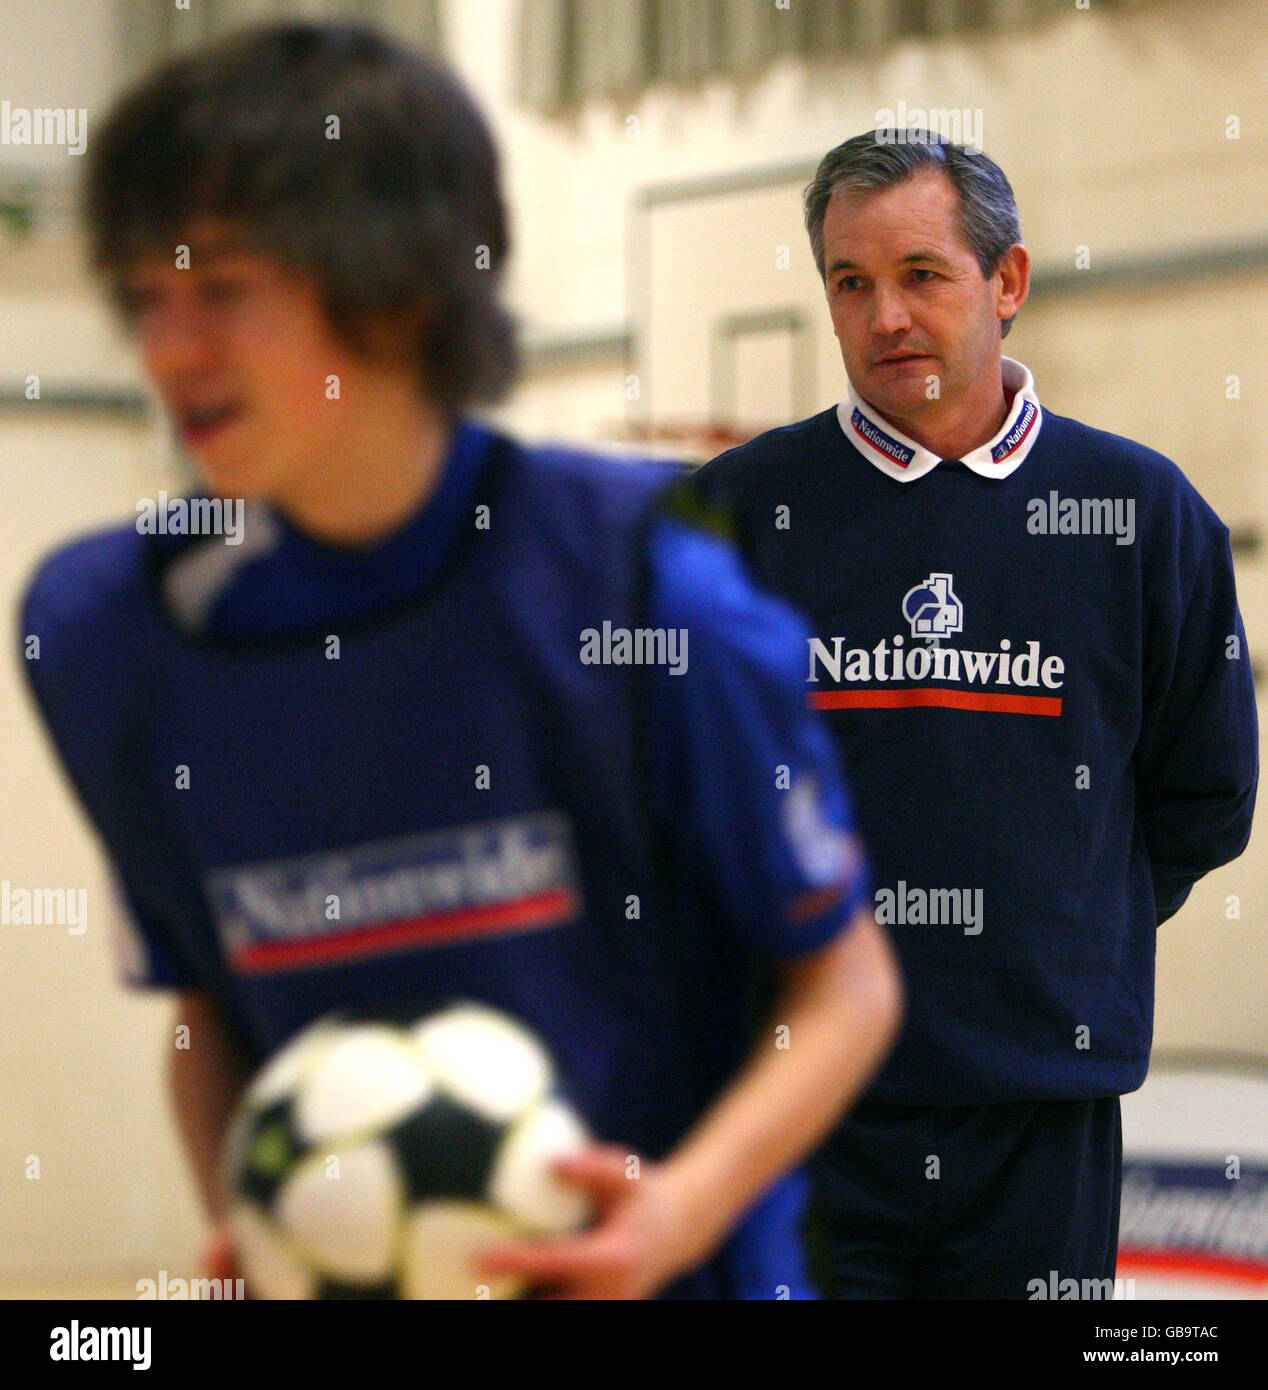 Soccer - Football Academy Photocall - George Burley - Graeme High School Banque D'Images